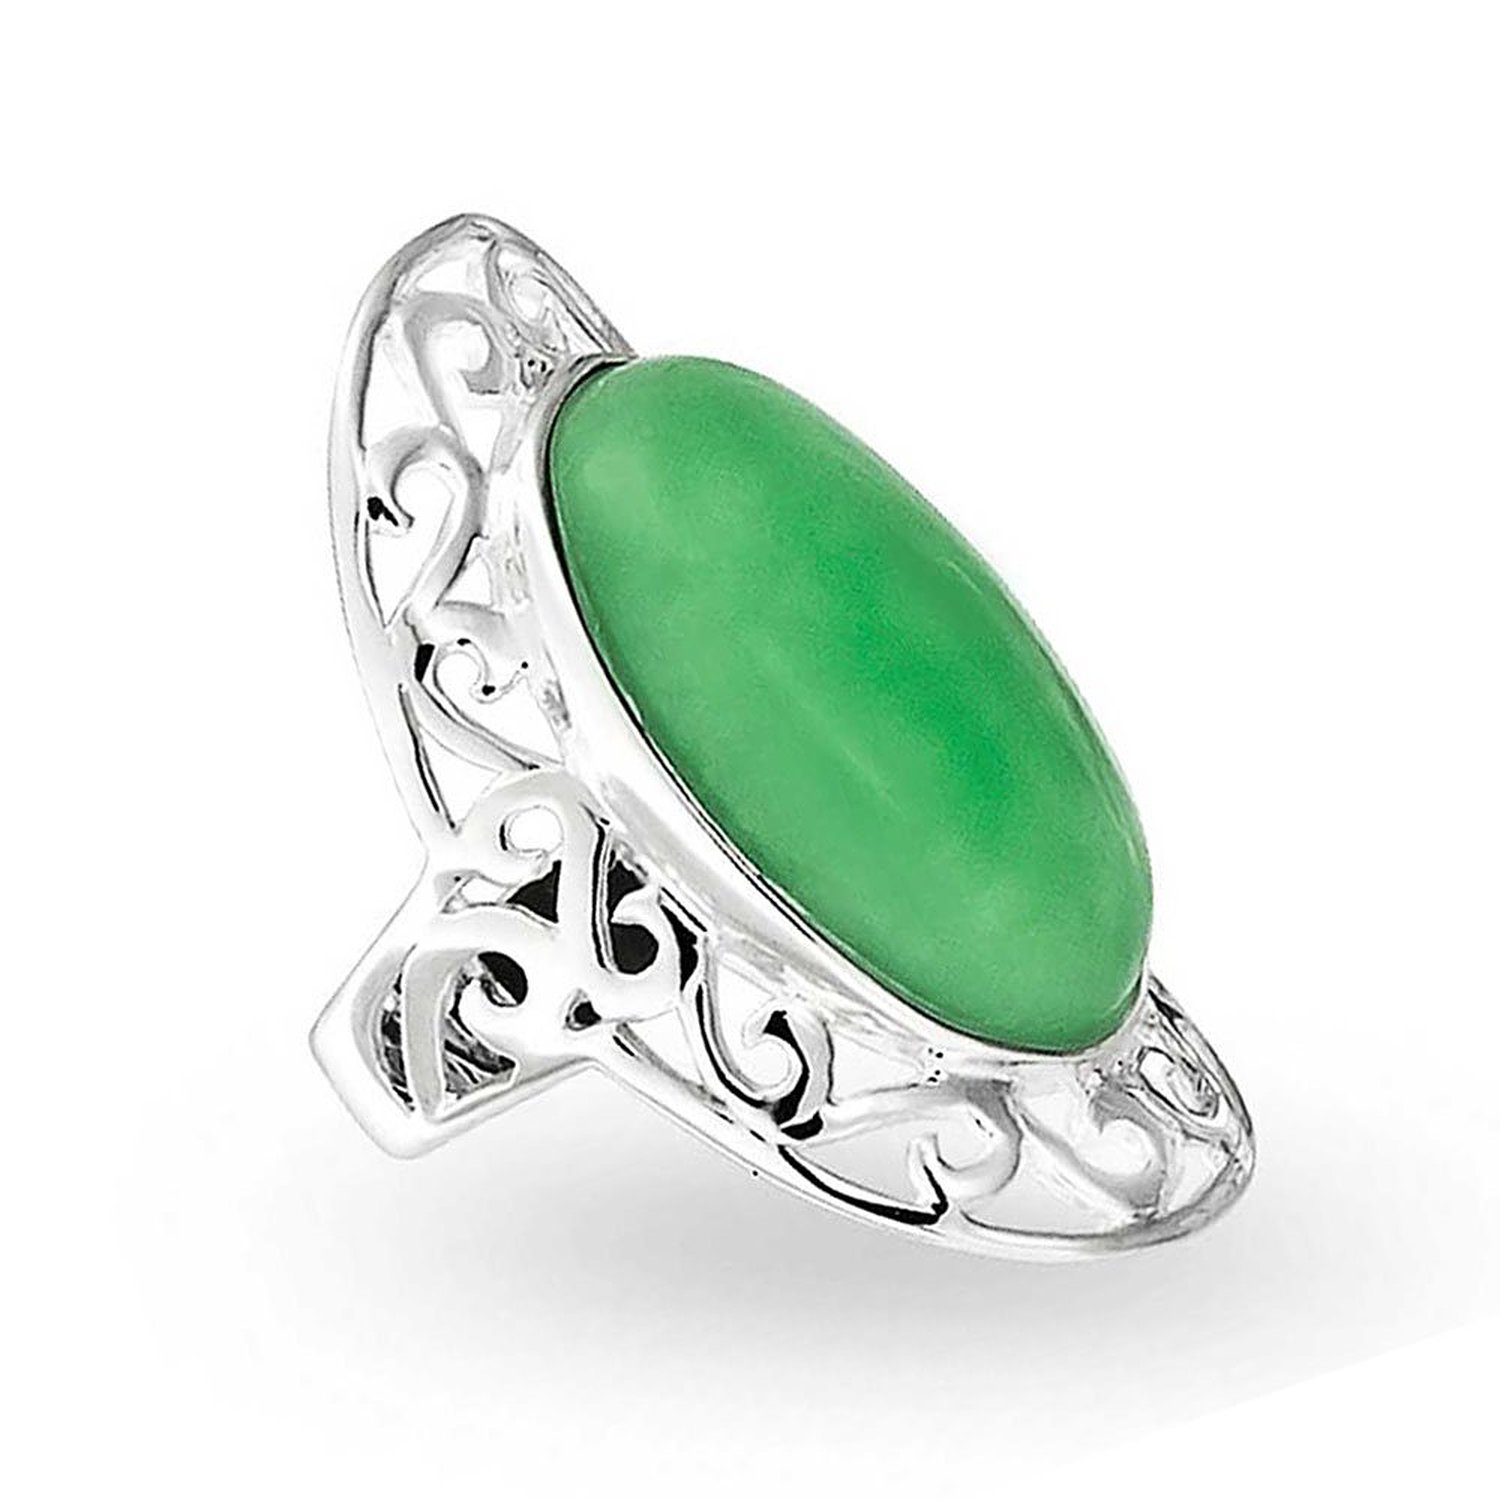 Bling Jewelry 925 Sterling Silver Gemstone Filigree Scroll Oval Green Simulated Jade Armor Ring